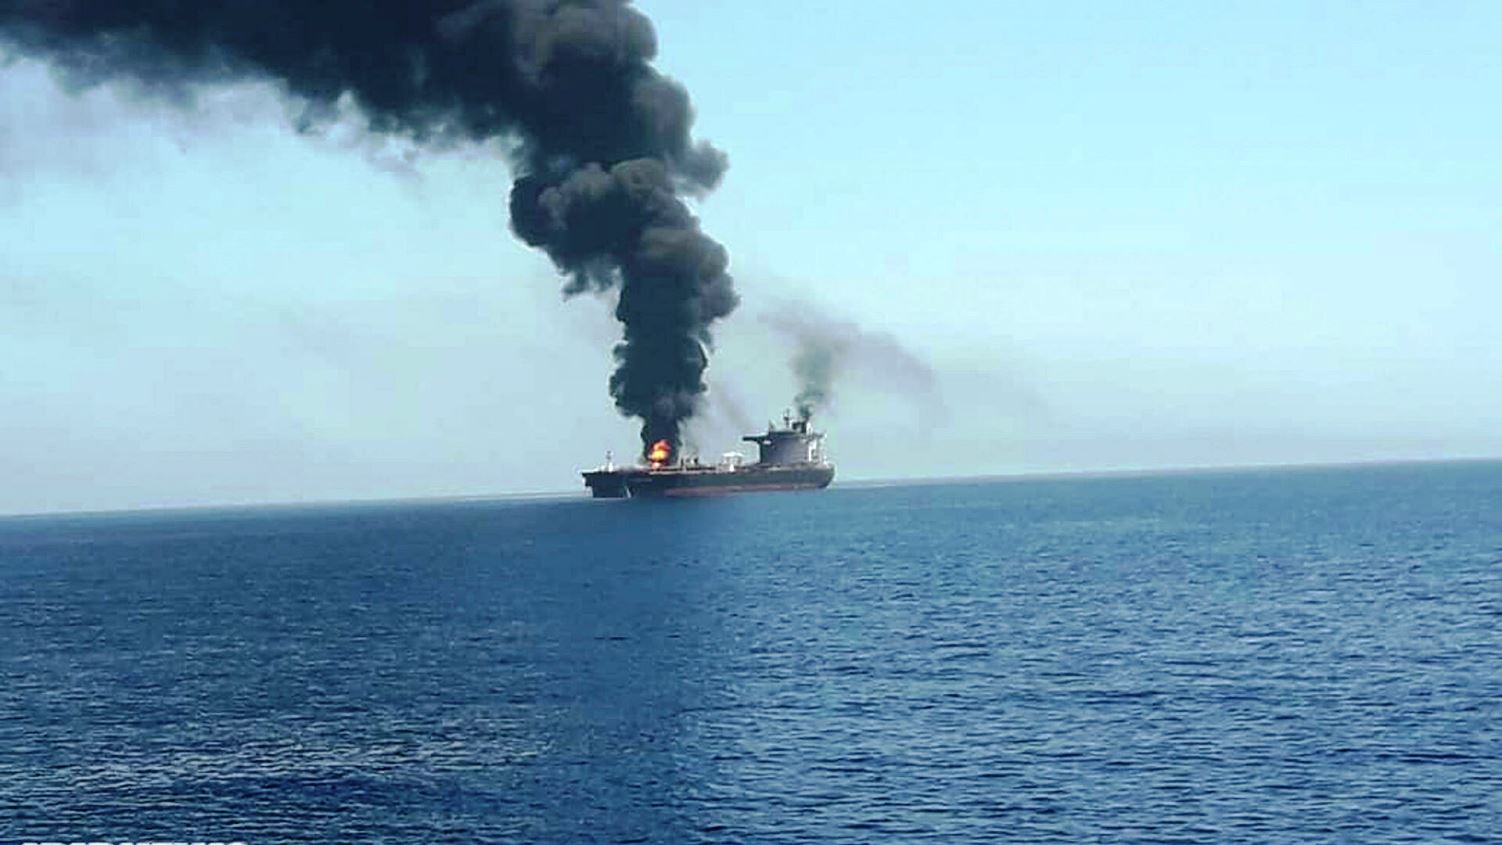 Israel’s Netanyahu:  Iran “clearly” attacked our ship